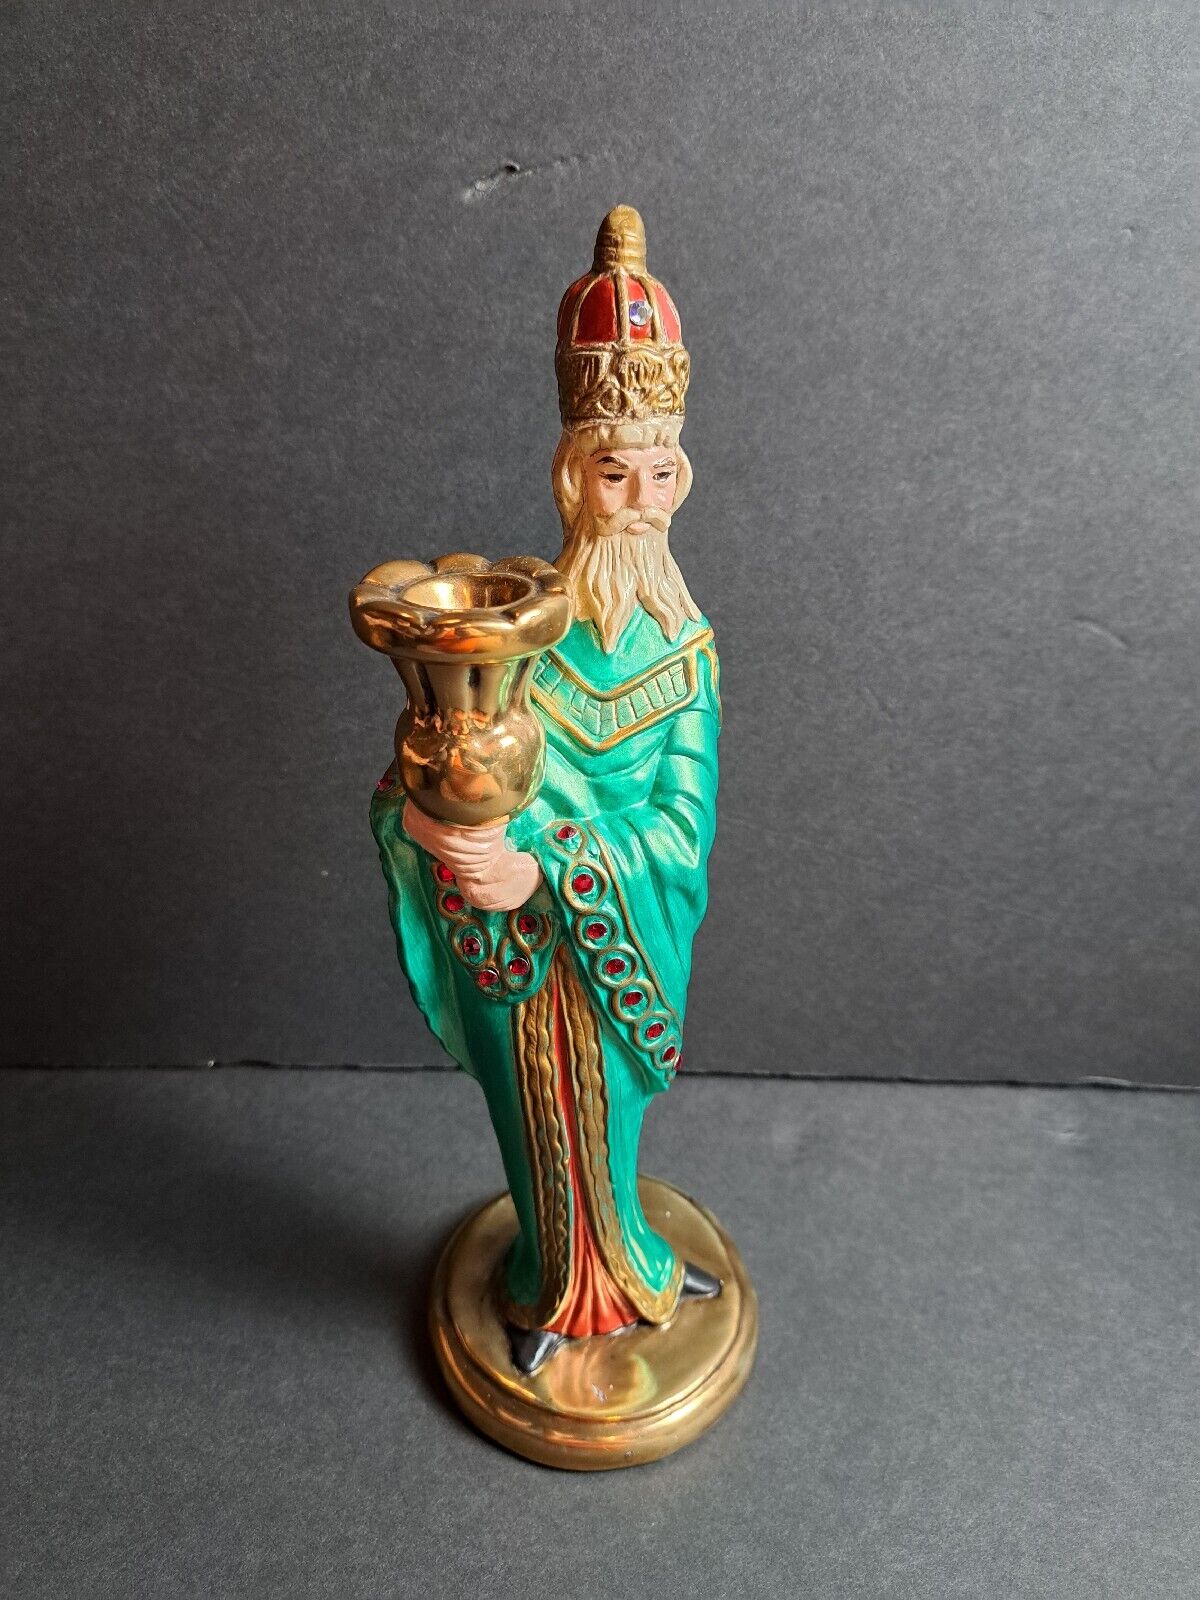 Christian Wise Man Statue Vintage Wiseman With Gems And Green Robe.  Old